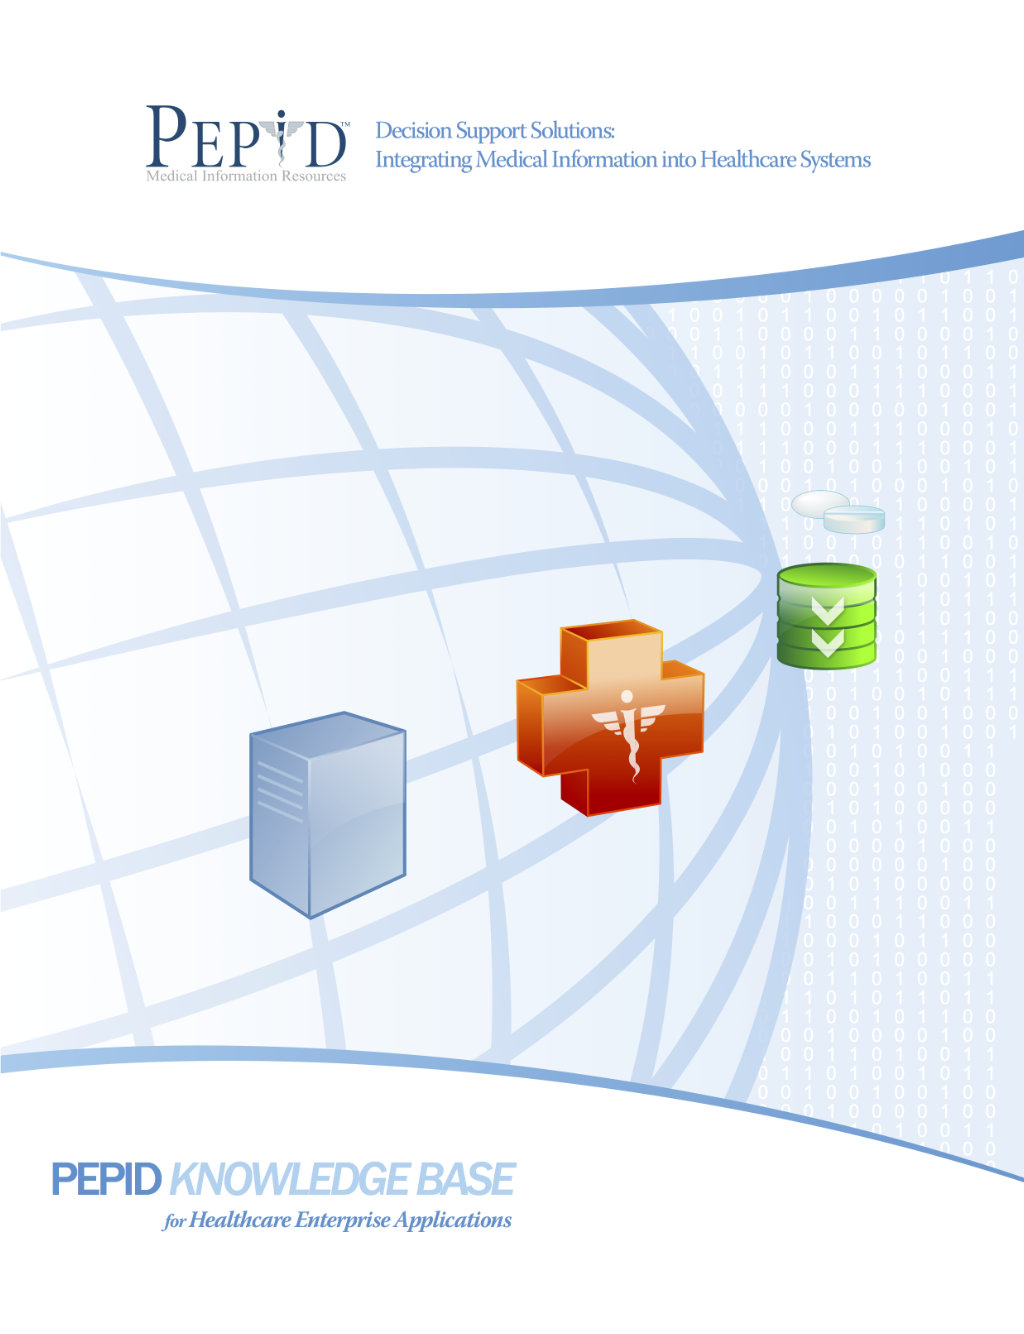 Image of Knowledge Base cover design.